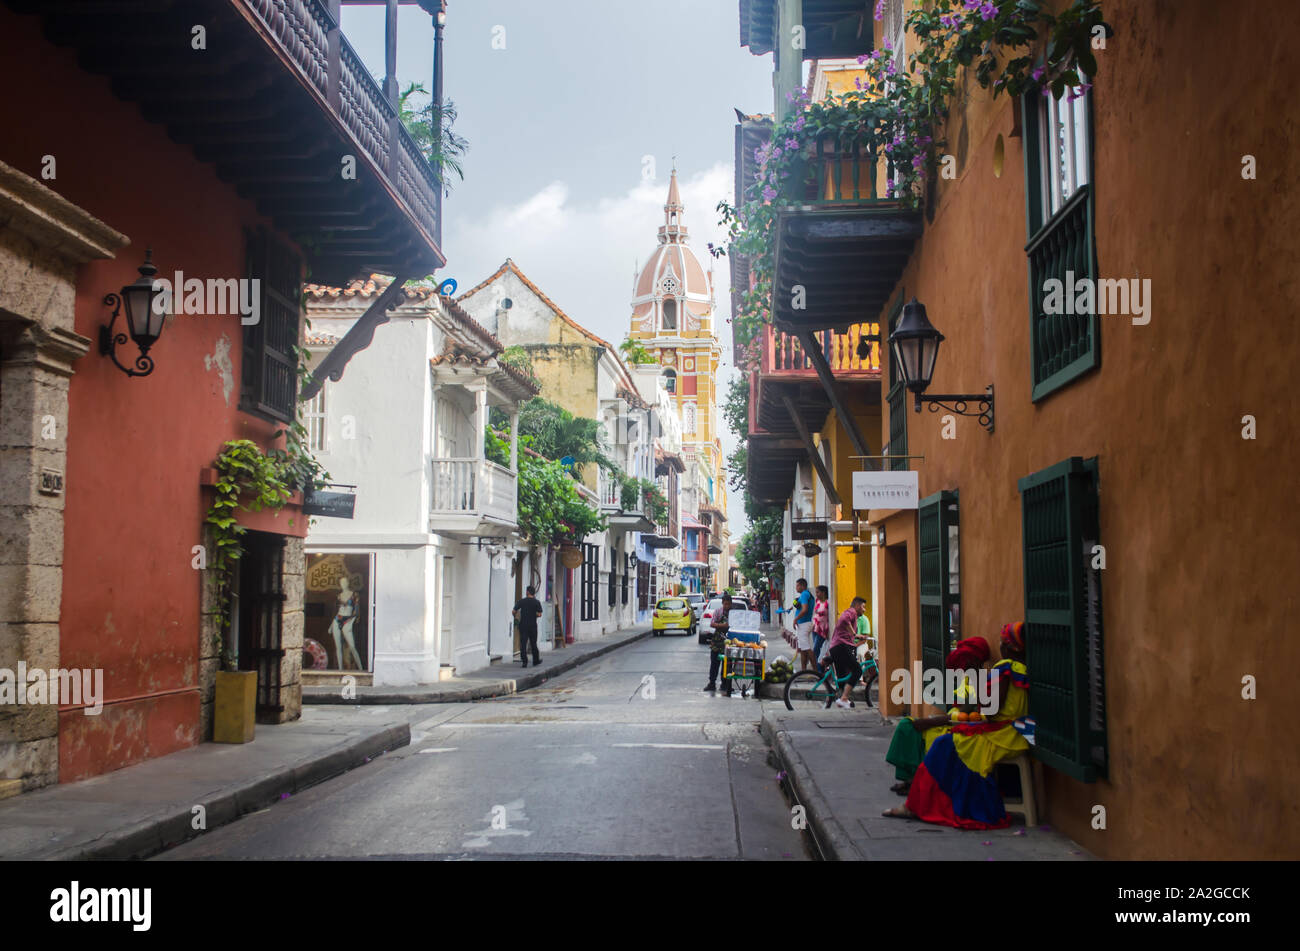 Scene of daily life in Cartagena during in afternoons before the sun goes down Stock Photo